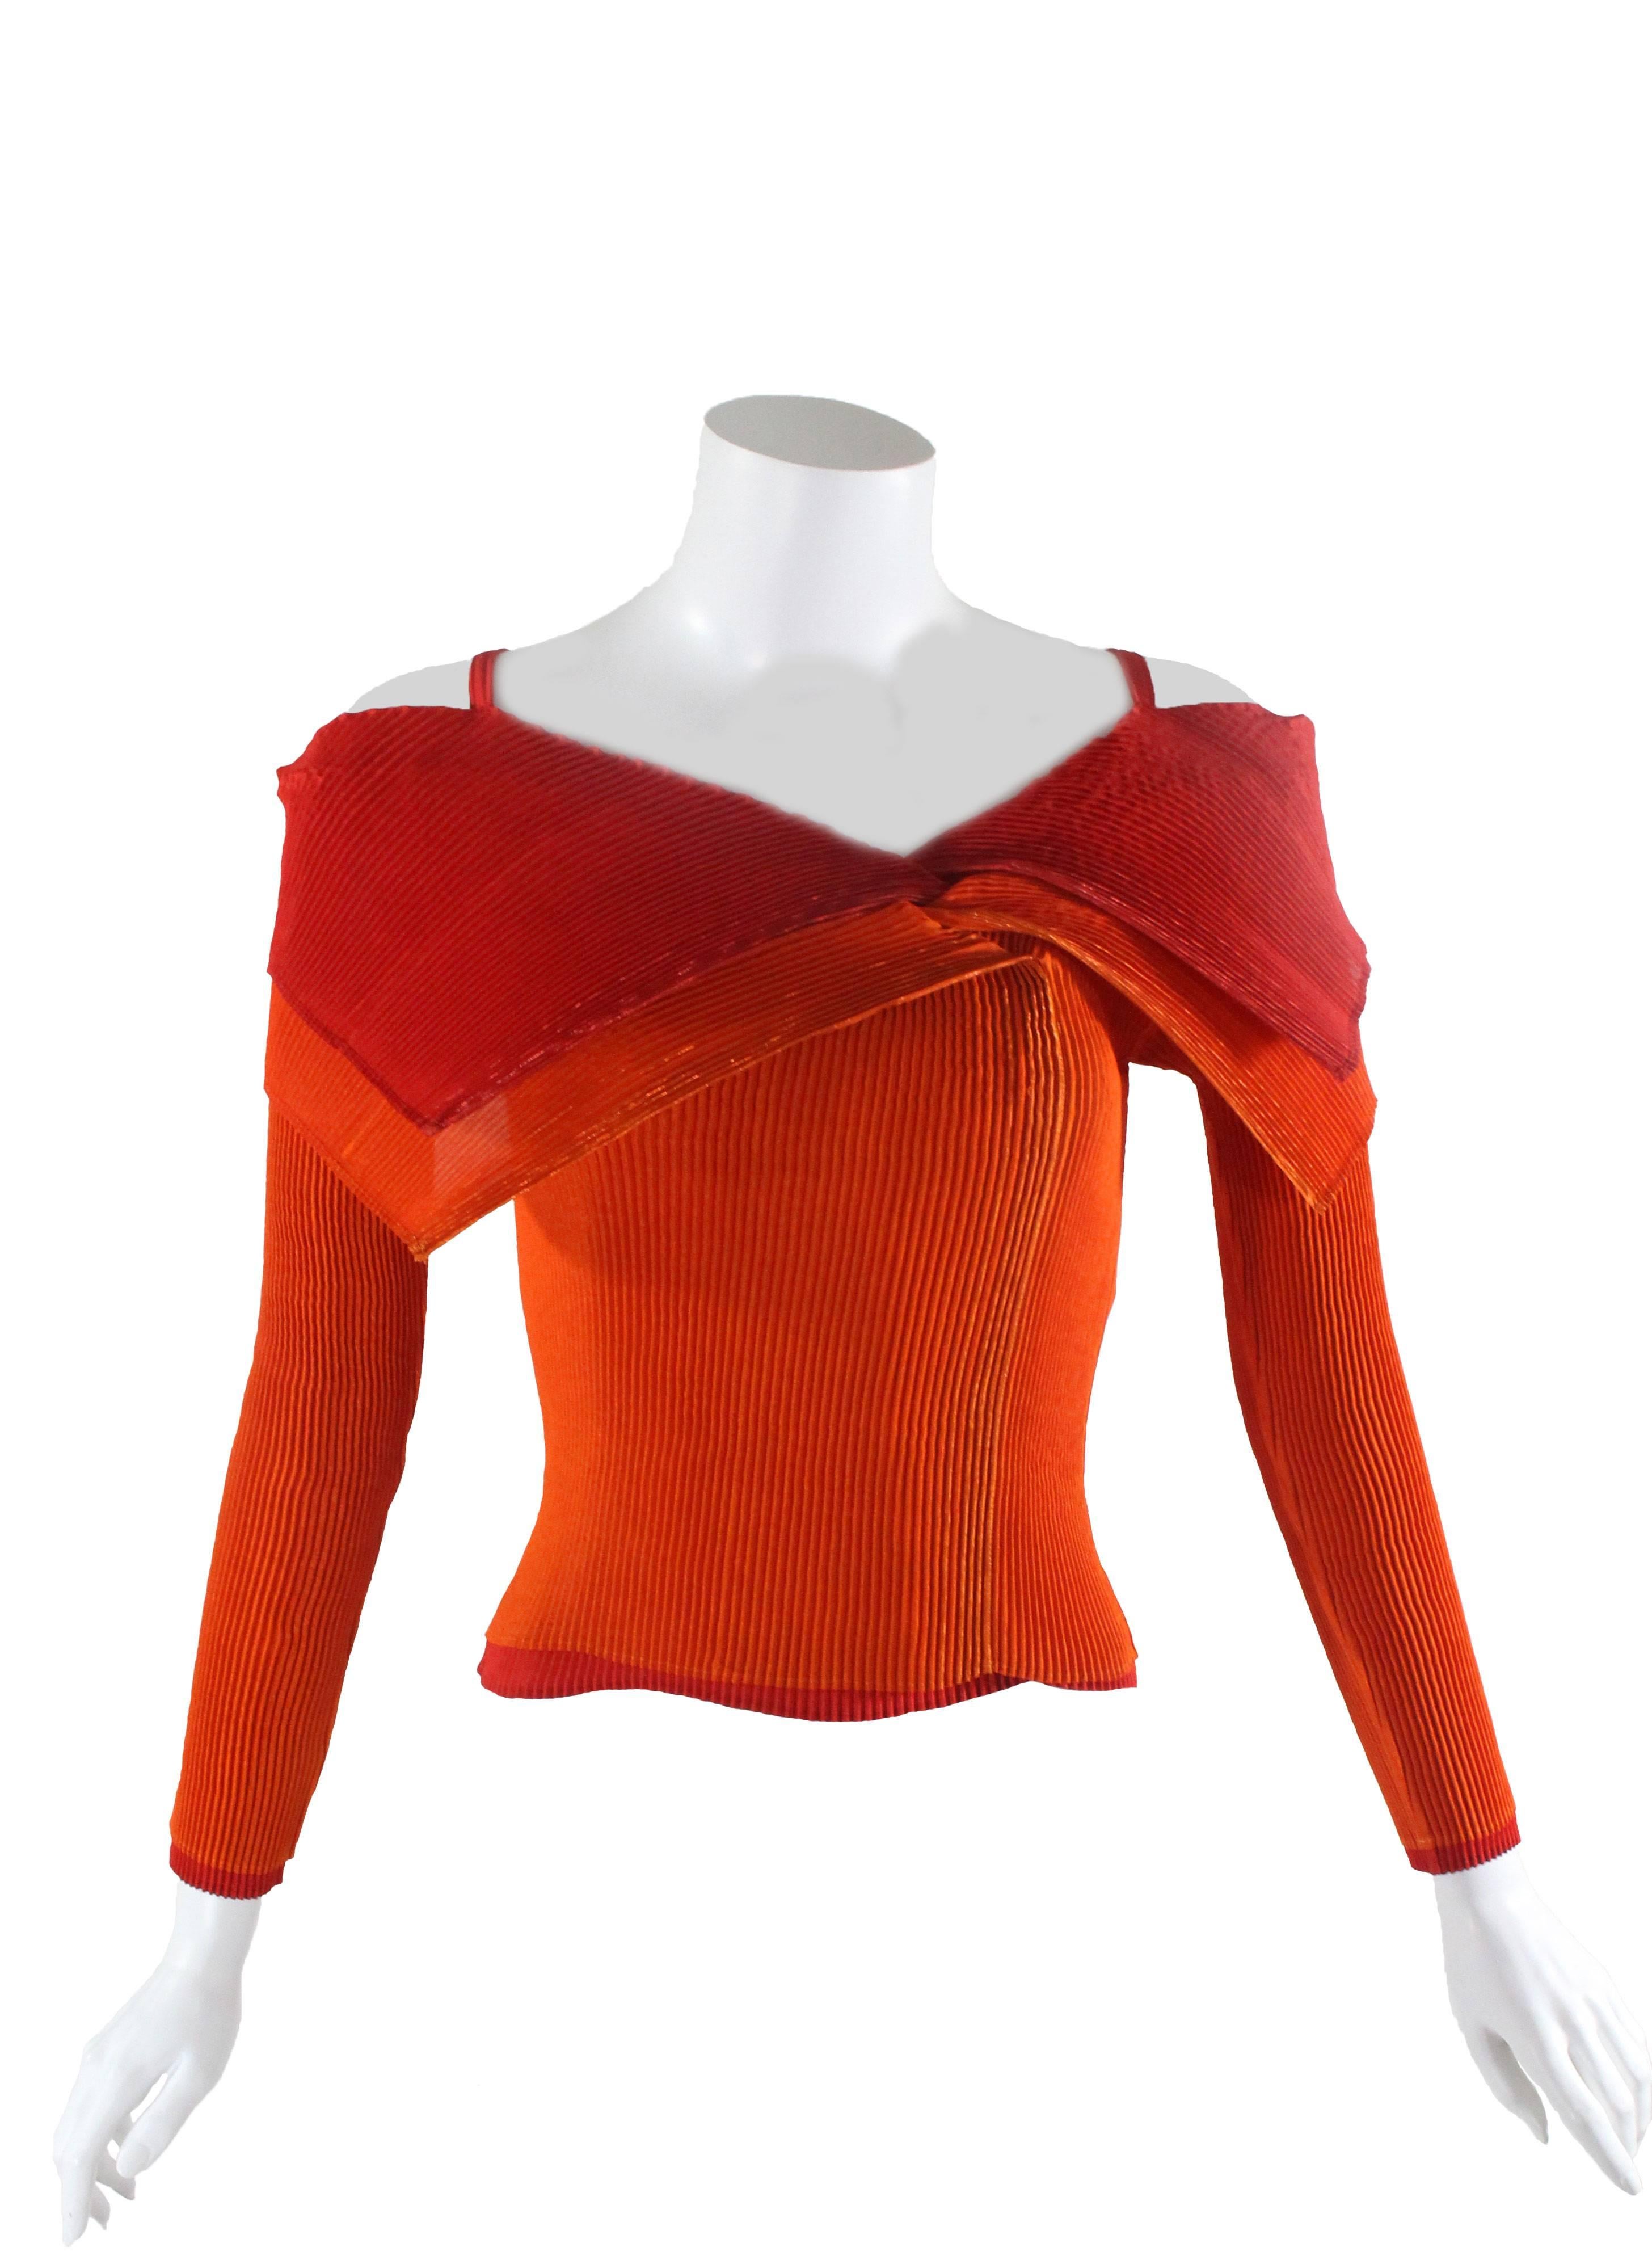 A fabulous sculptural top from Issey Miyake circa 1990. Fashioned from Issey Miyake's signature vertical pleated fabric in a double layer with red on the inside and orange on the exterior. The vivid red and orange fabrics have a subtle metallic